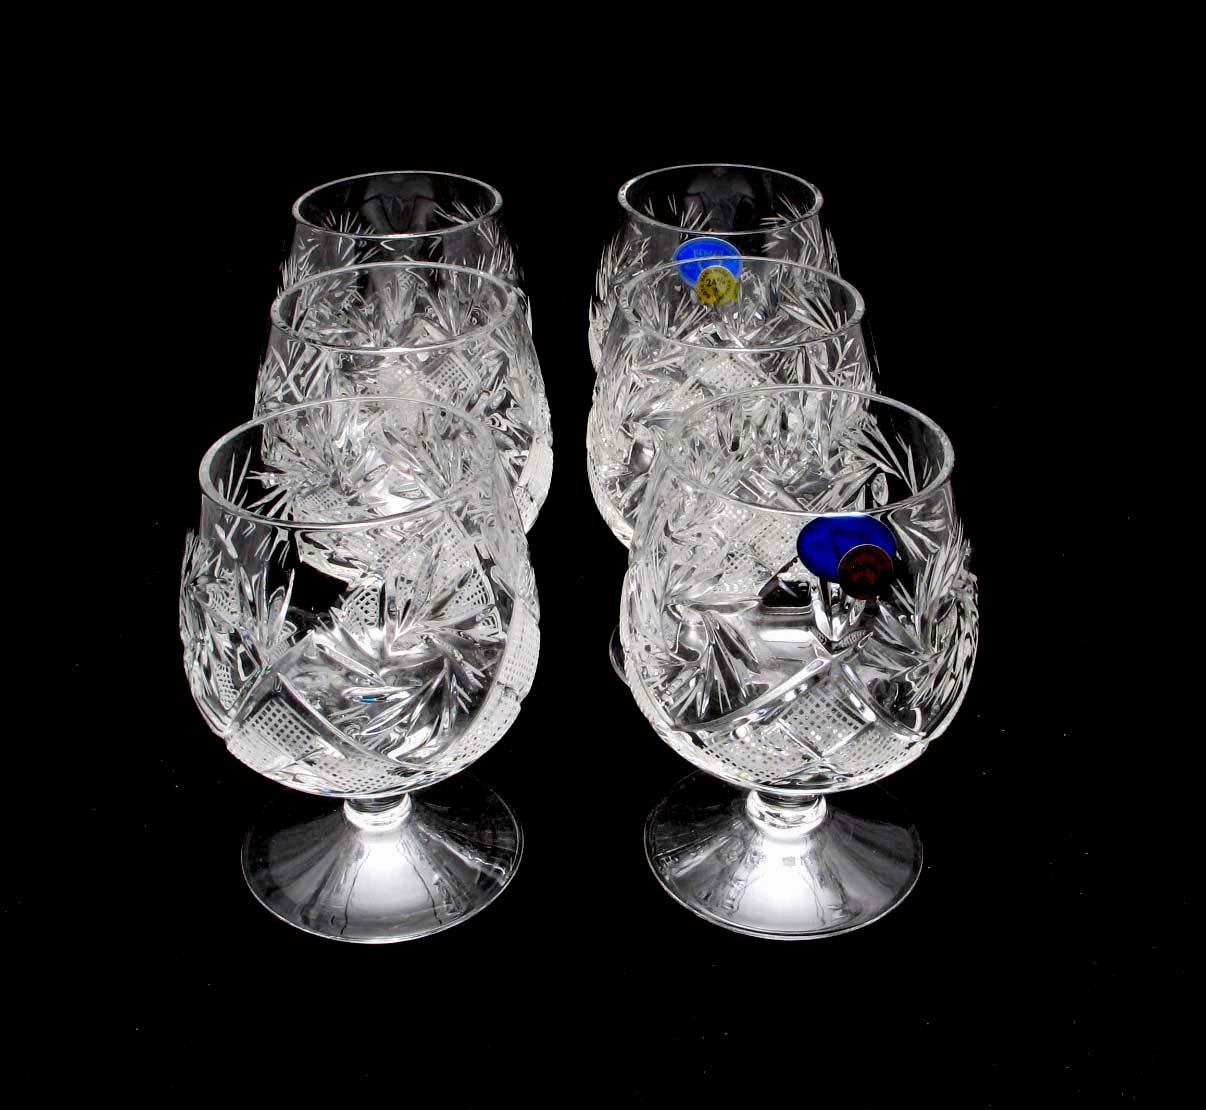 Russian European Cut Crystal Brandy Cognac Snifters, Vintage Old-Fashioned Glassware, Set of 6